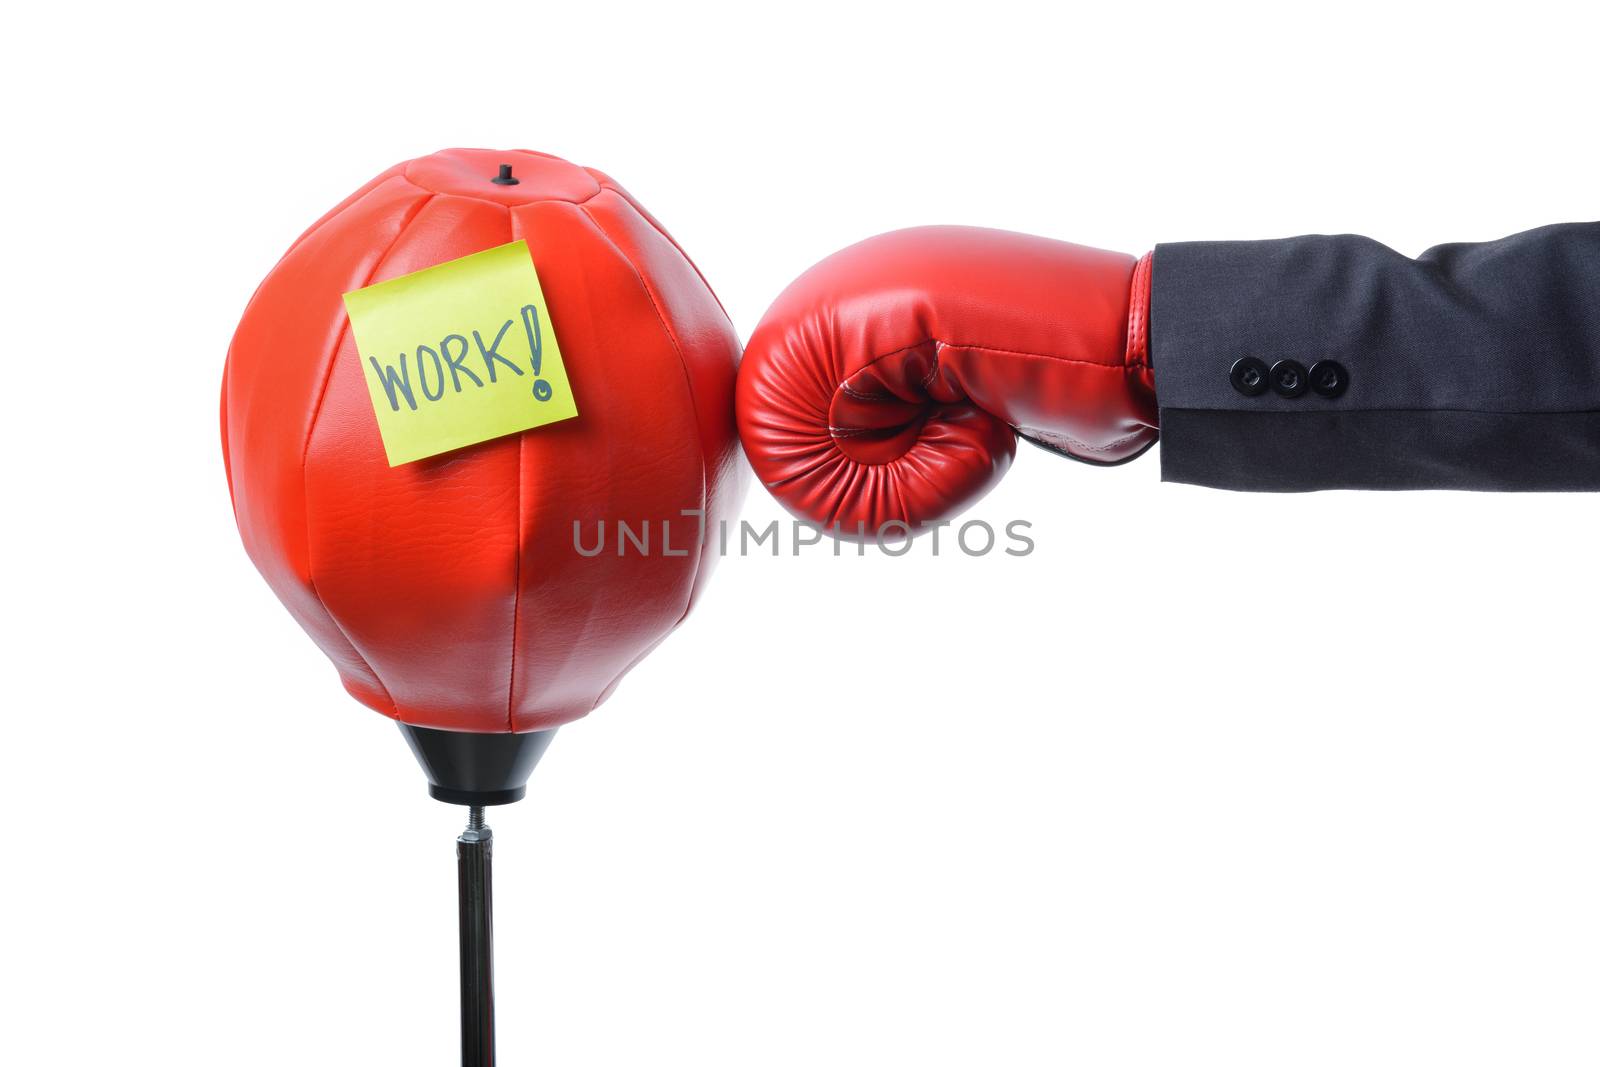 businessman fist punch punching bag , business concept by numskyman